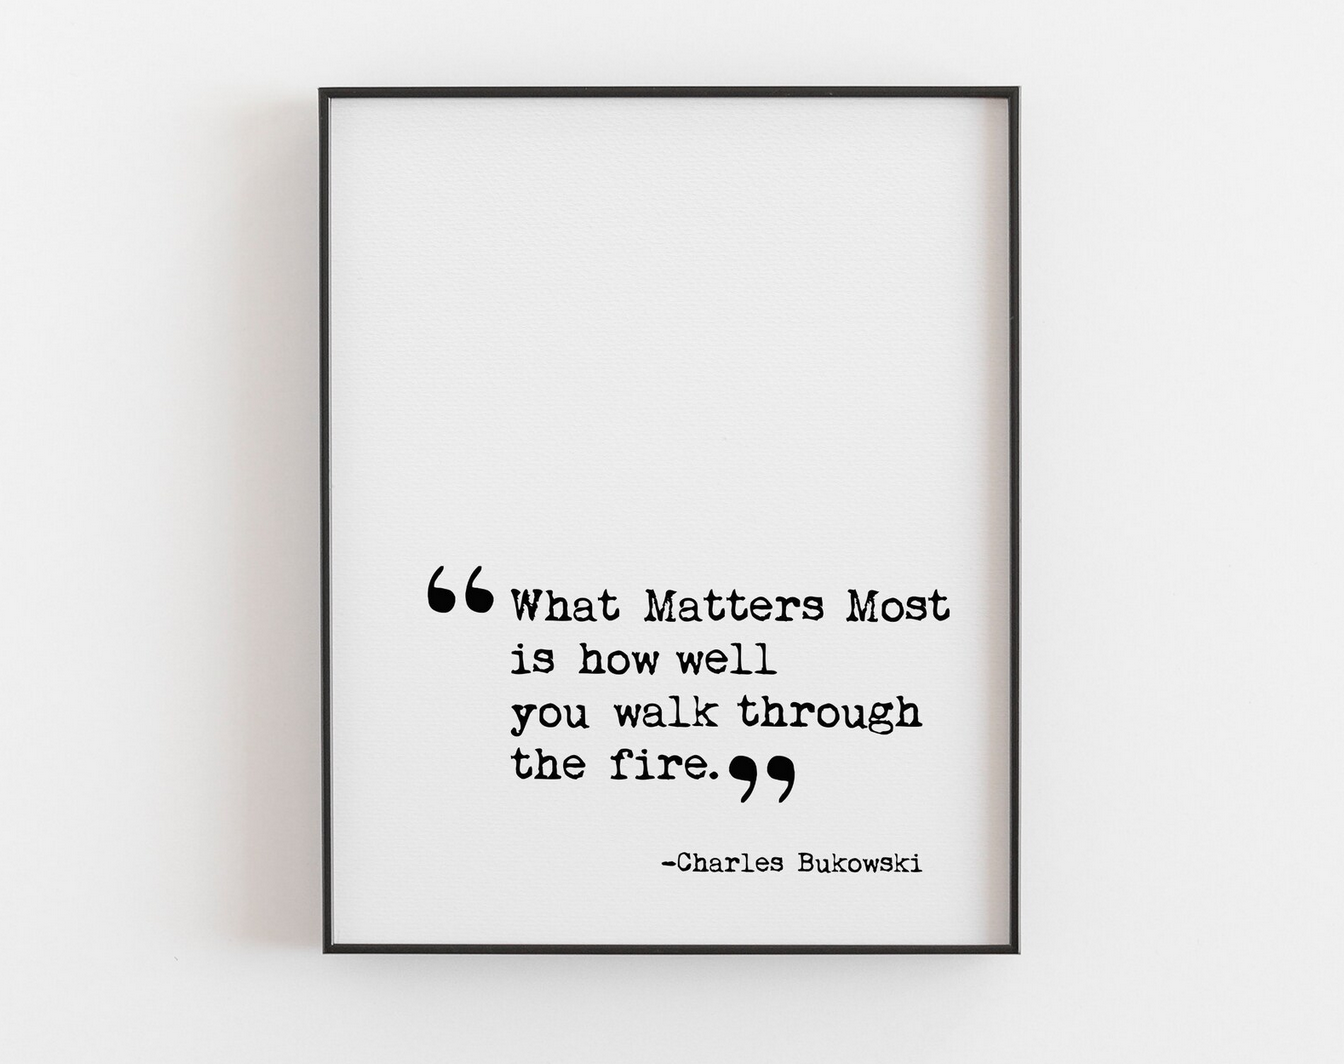 Print of the quote: "What matters most is how well you walk through fire. -Charles Bukowski"